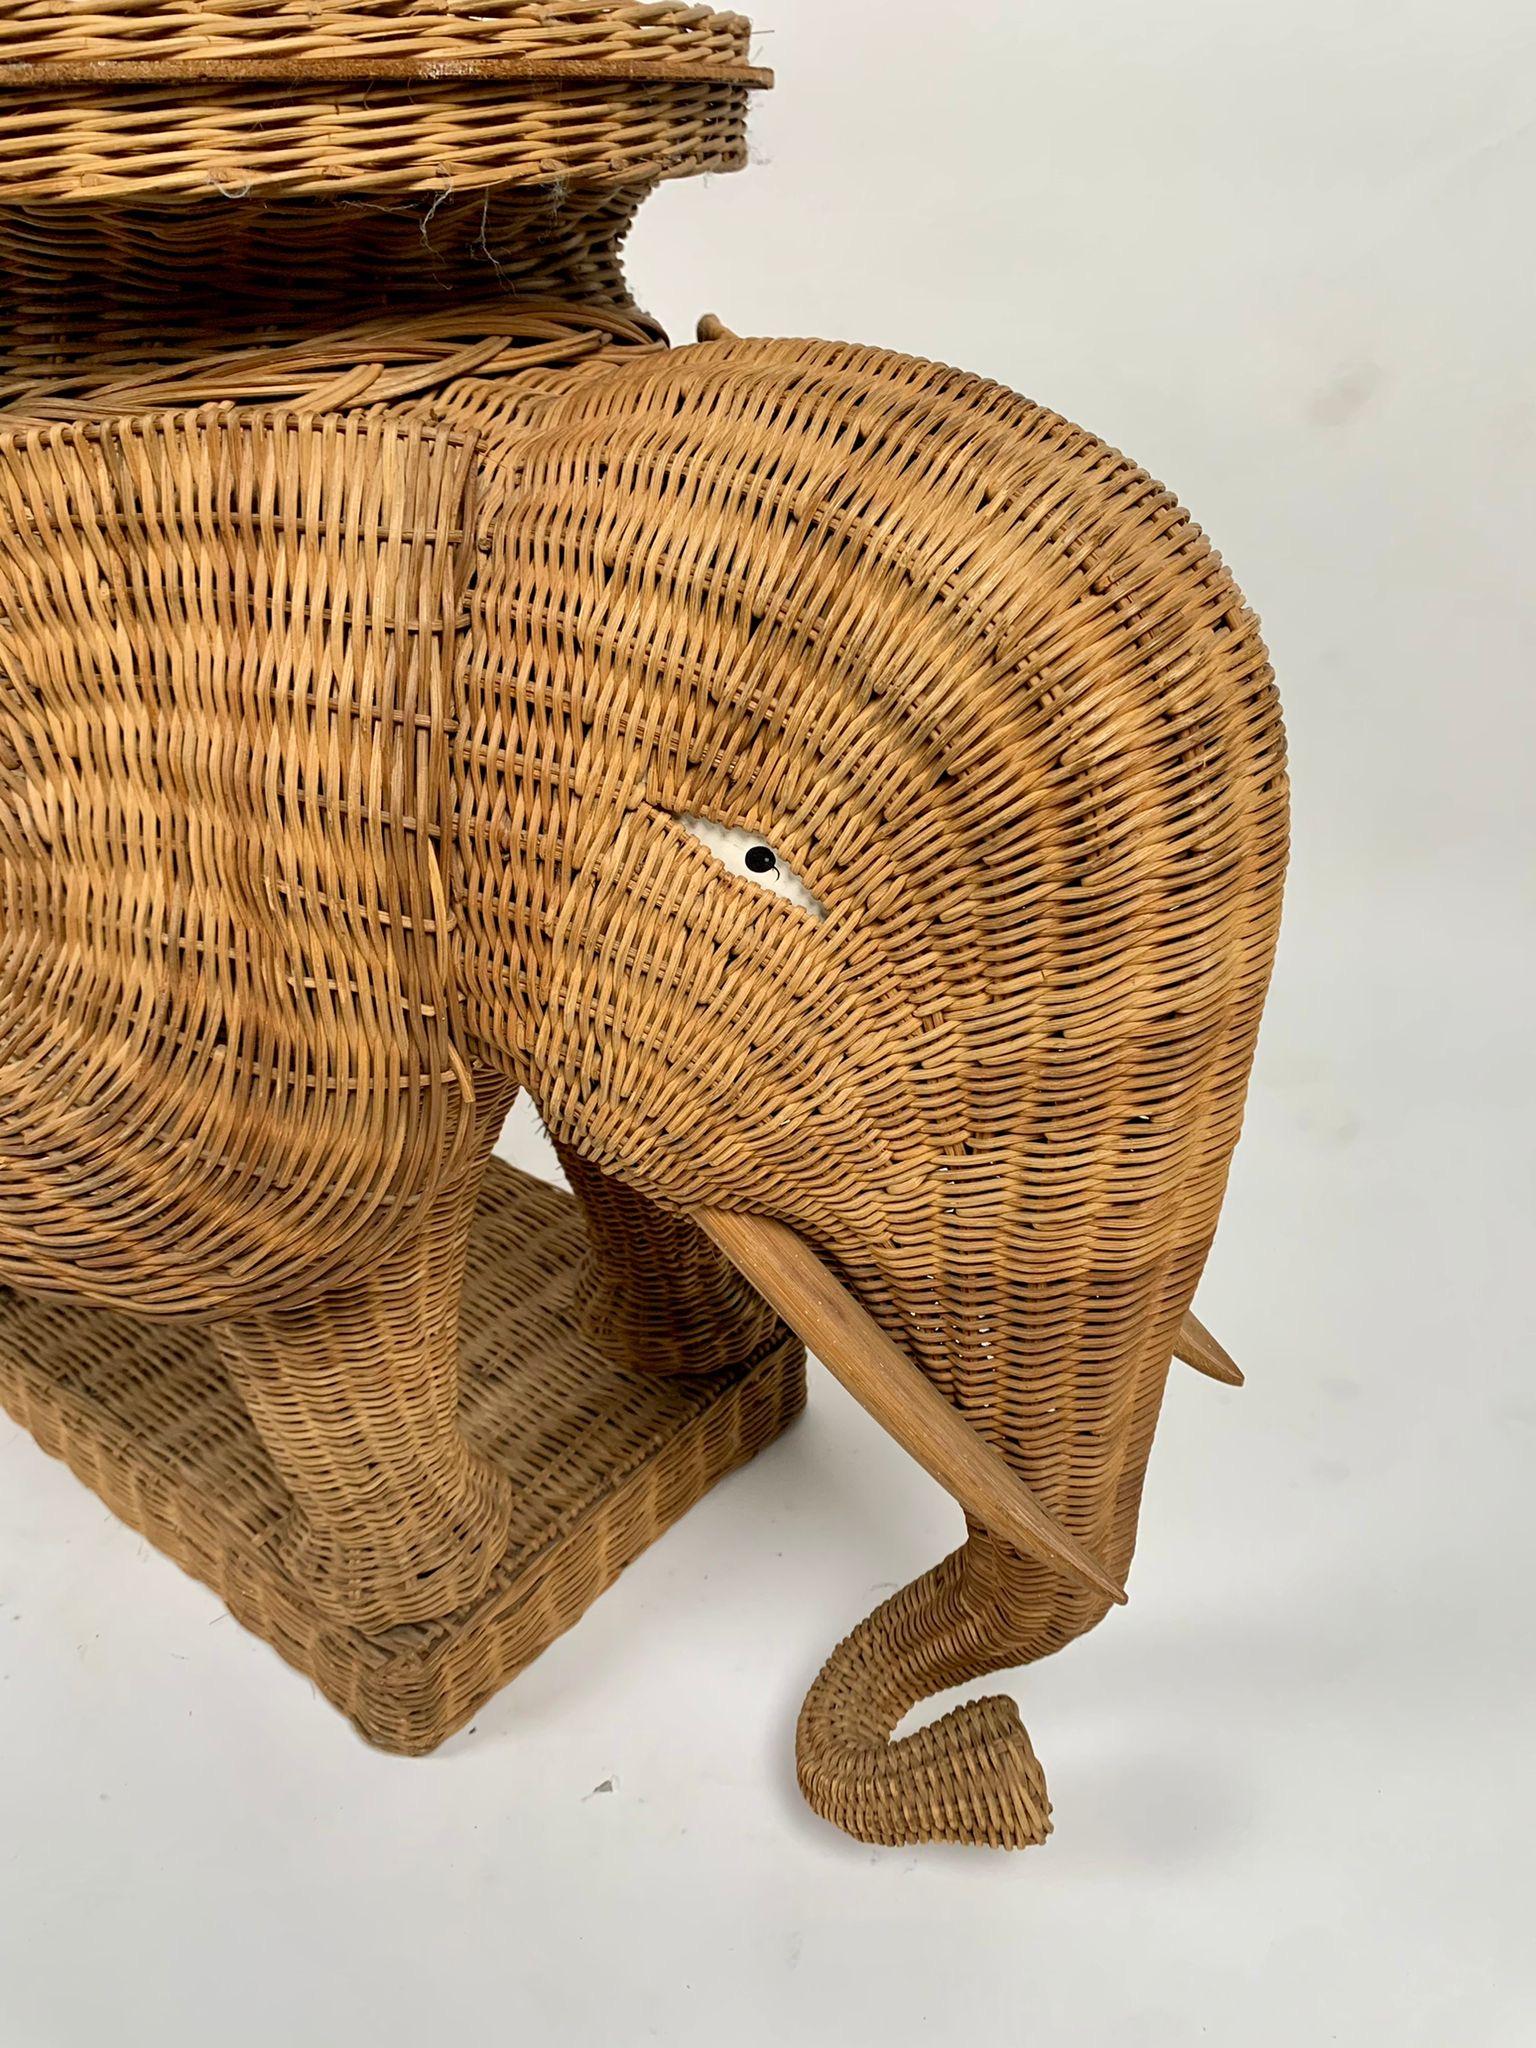 Elephant-shaped wicker table made by Vivai del Sud, Italy, 1970s For Sale 7